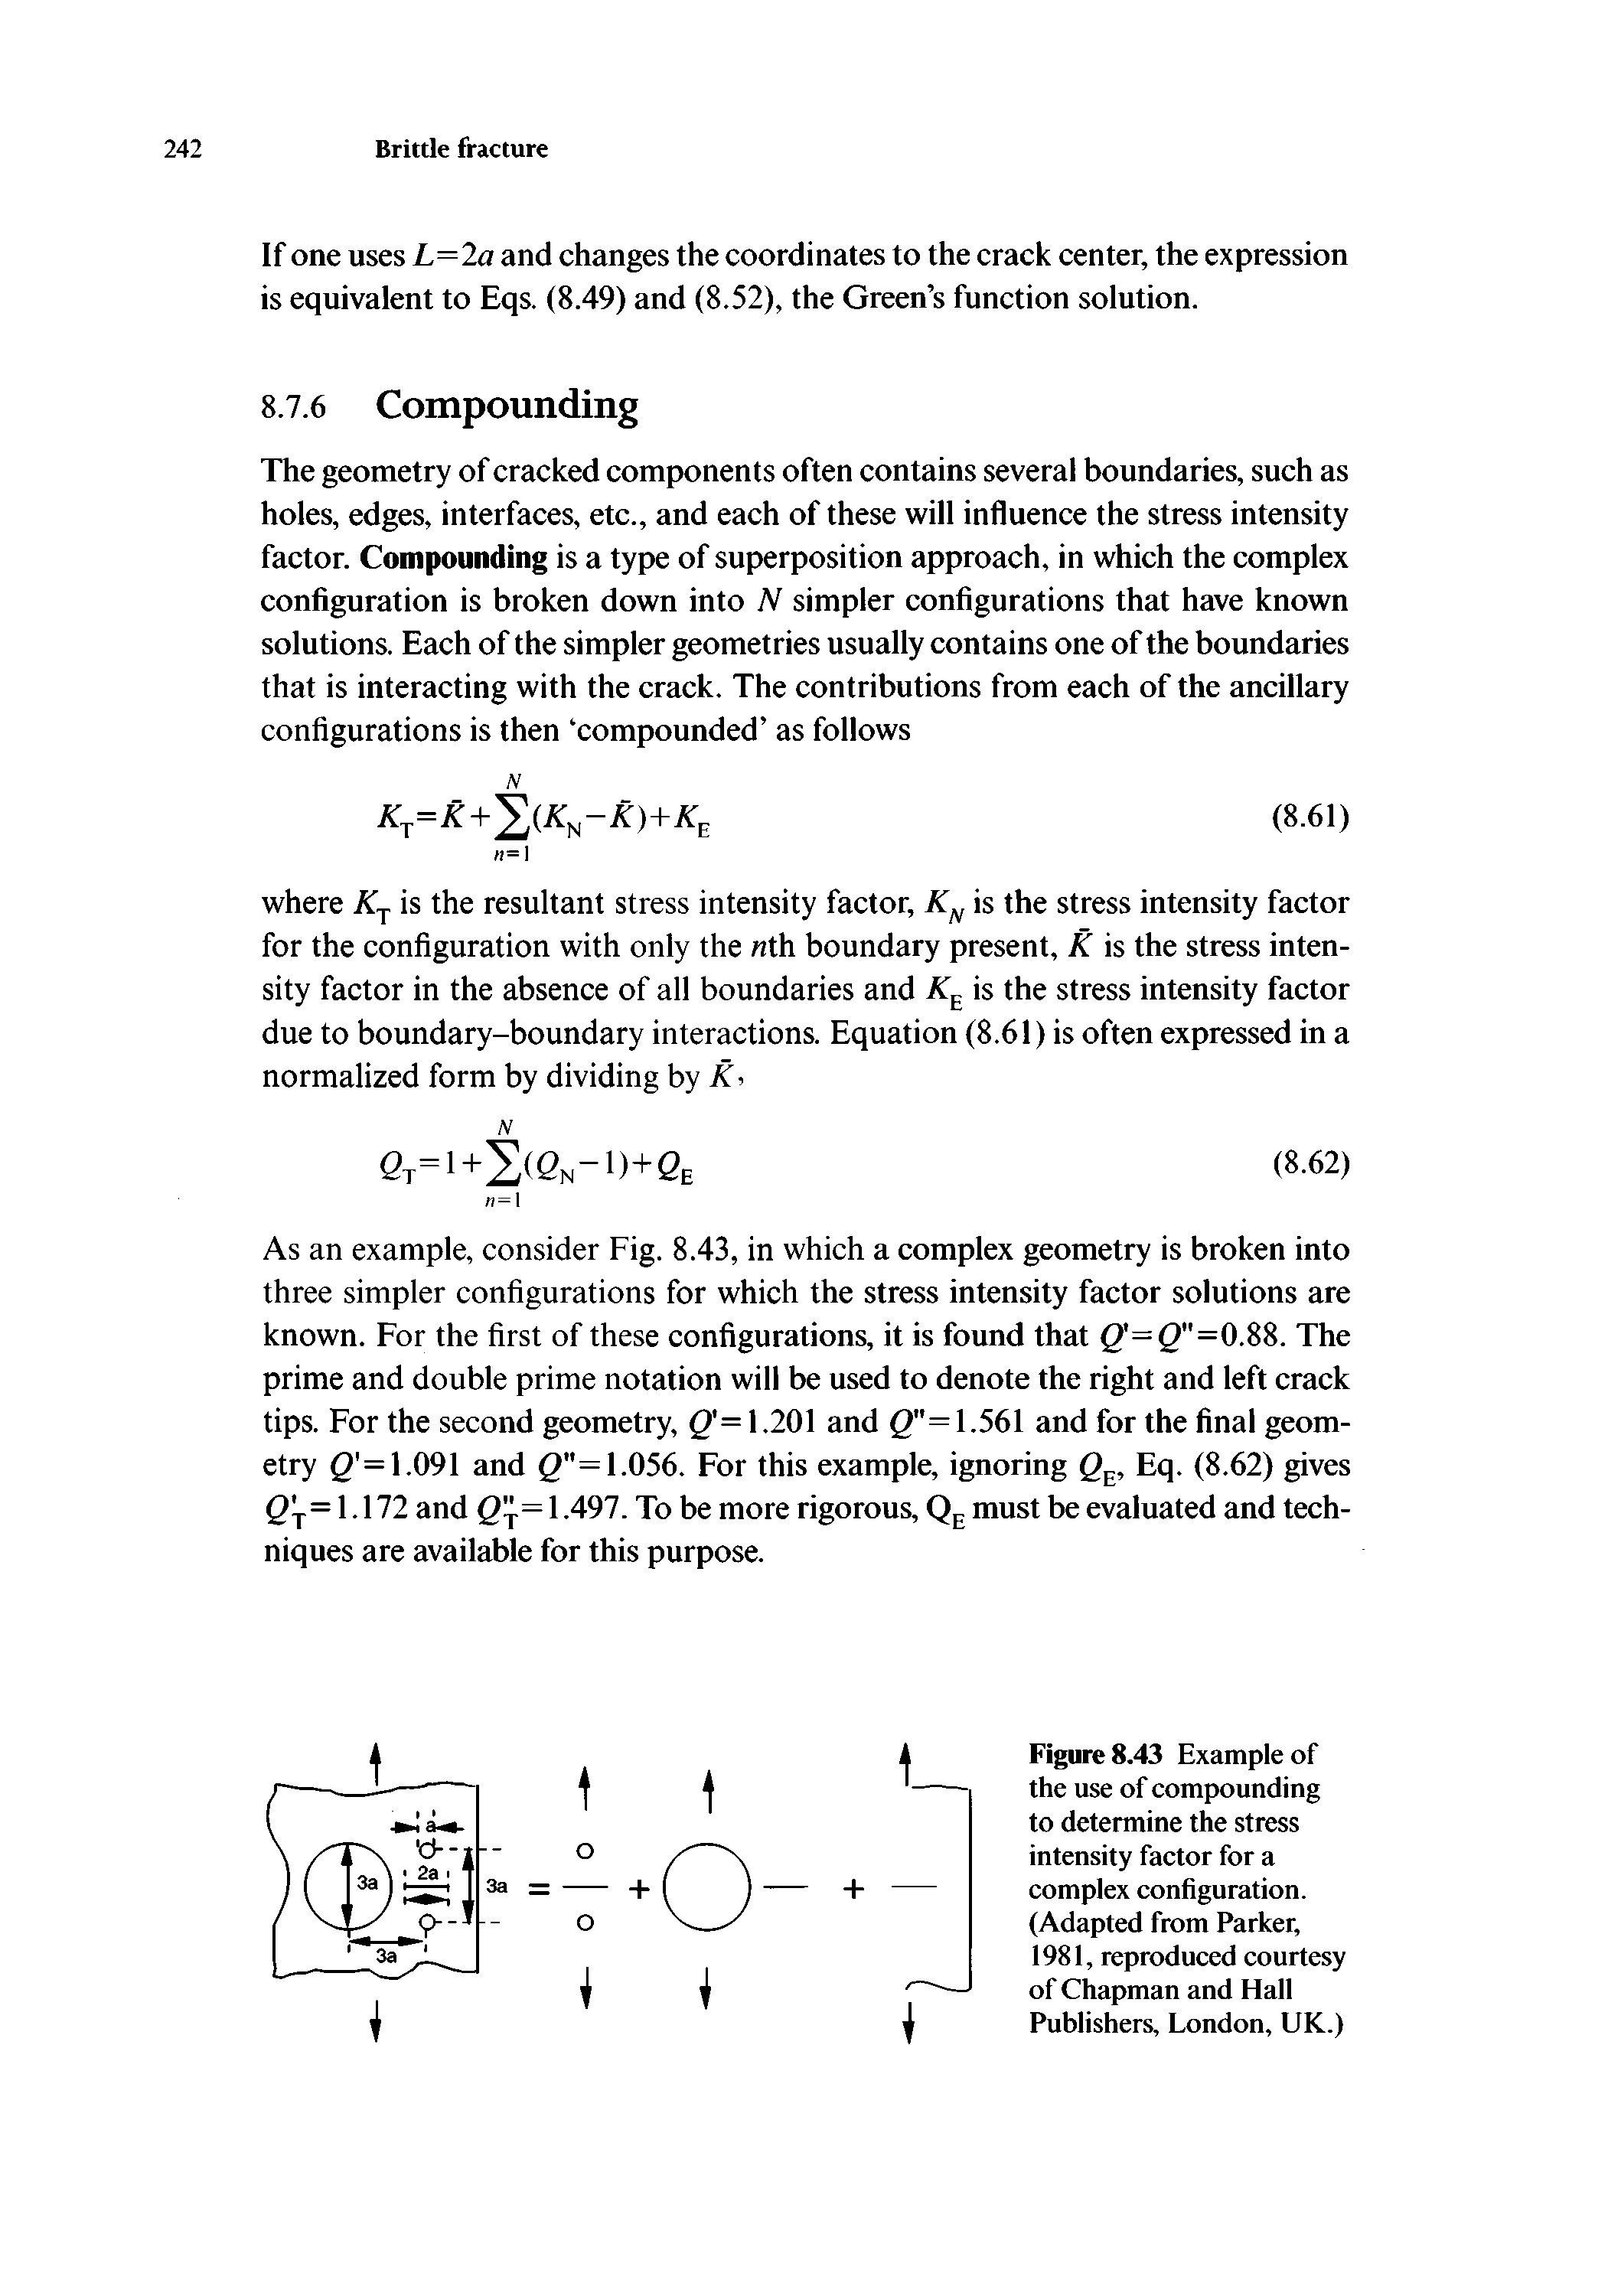 Figure 8.43 Example of the use of compounding to determine the stress intensity factor for a complex configuration. (Adapted from Parker, 1981, reproduced courtesy of Chapman and Hall Publishers, London, UK.)...